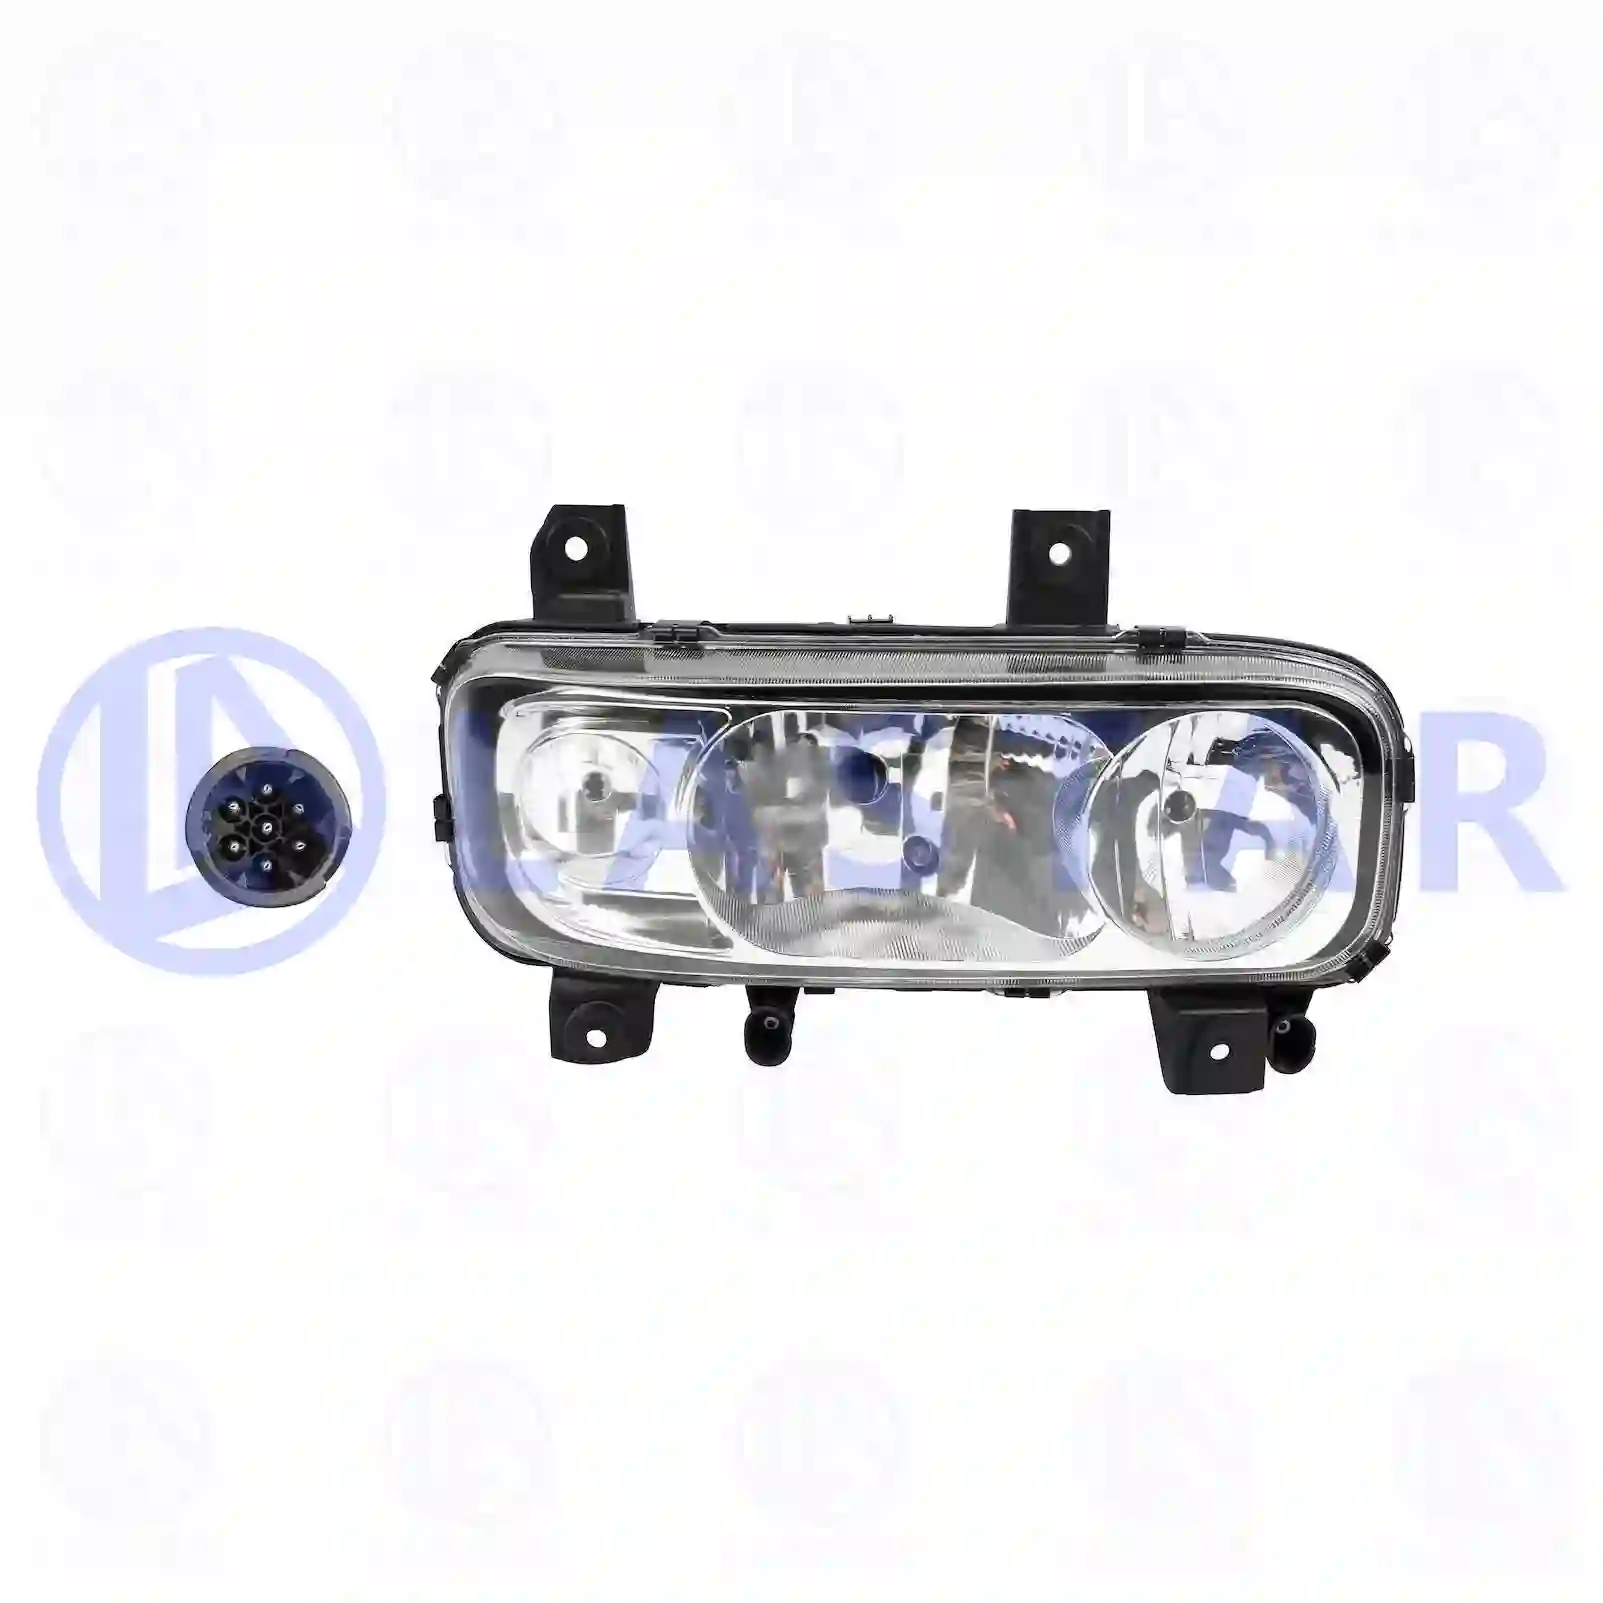 Headlamp, right, with fog lamp, without adjusting motor, 77711865, 6868200161, 9738202761, , , ||  77711865 Lastar Spare Part | Truck Spare Parts, Auotomotive Spare Parts Headlamp, right, with fog lamp, without adjusting motor, 77711865, 6868200161, 9738202761, , , ||  77711865 Lastar Spare Part | Truck Spare Parts, Auotomotive Spare Parts